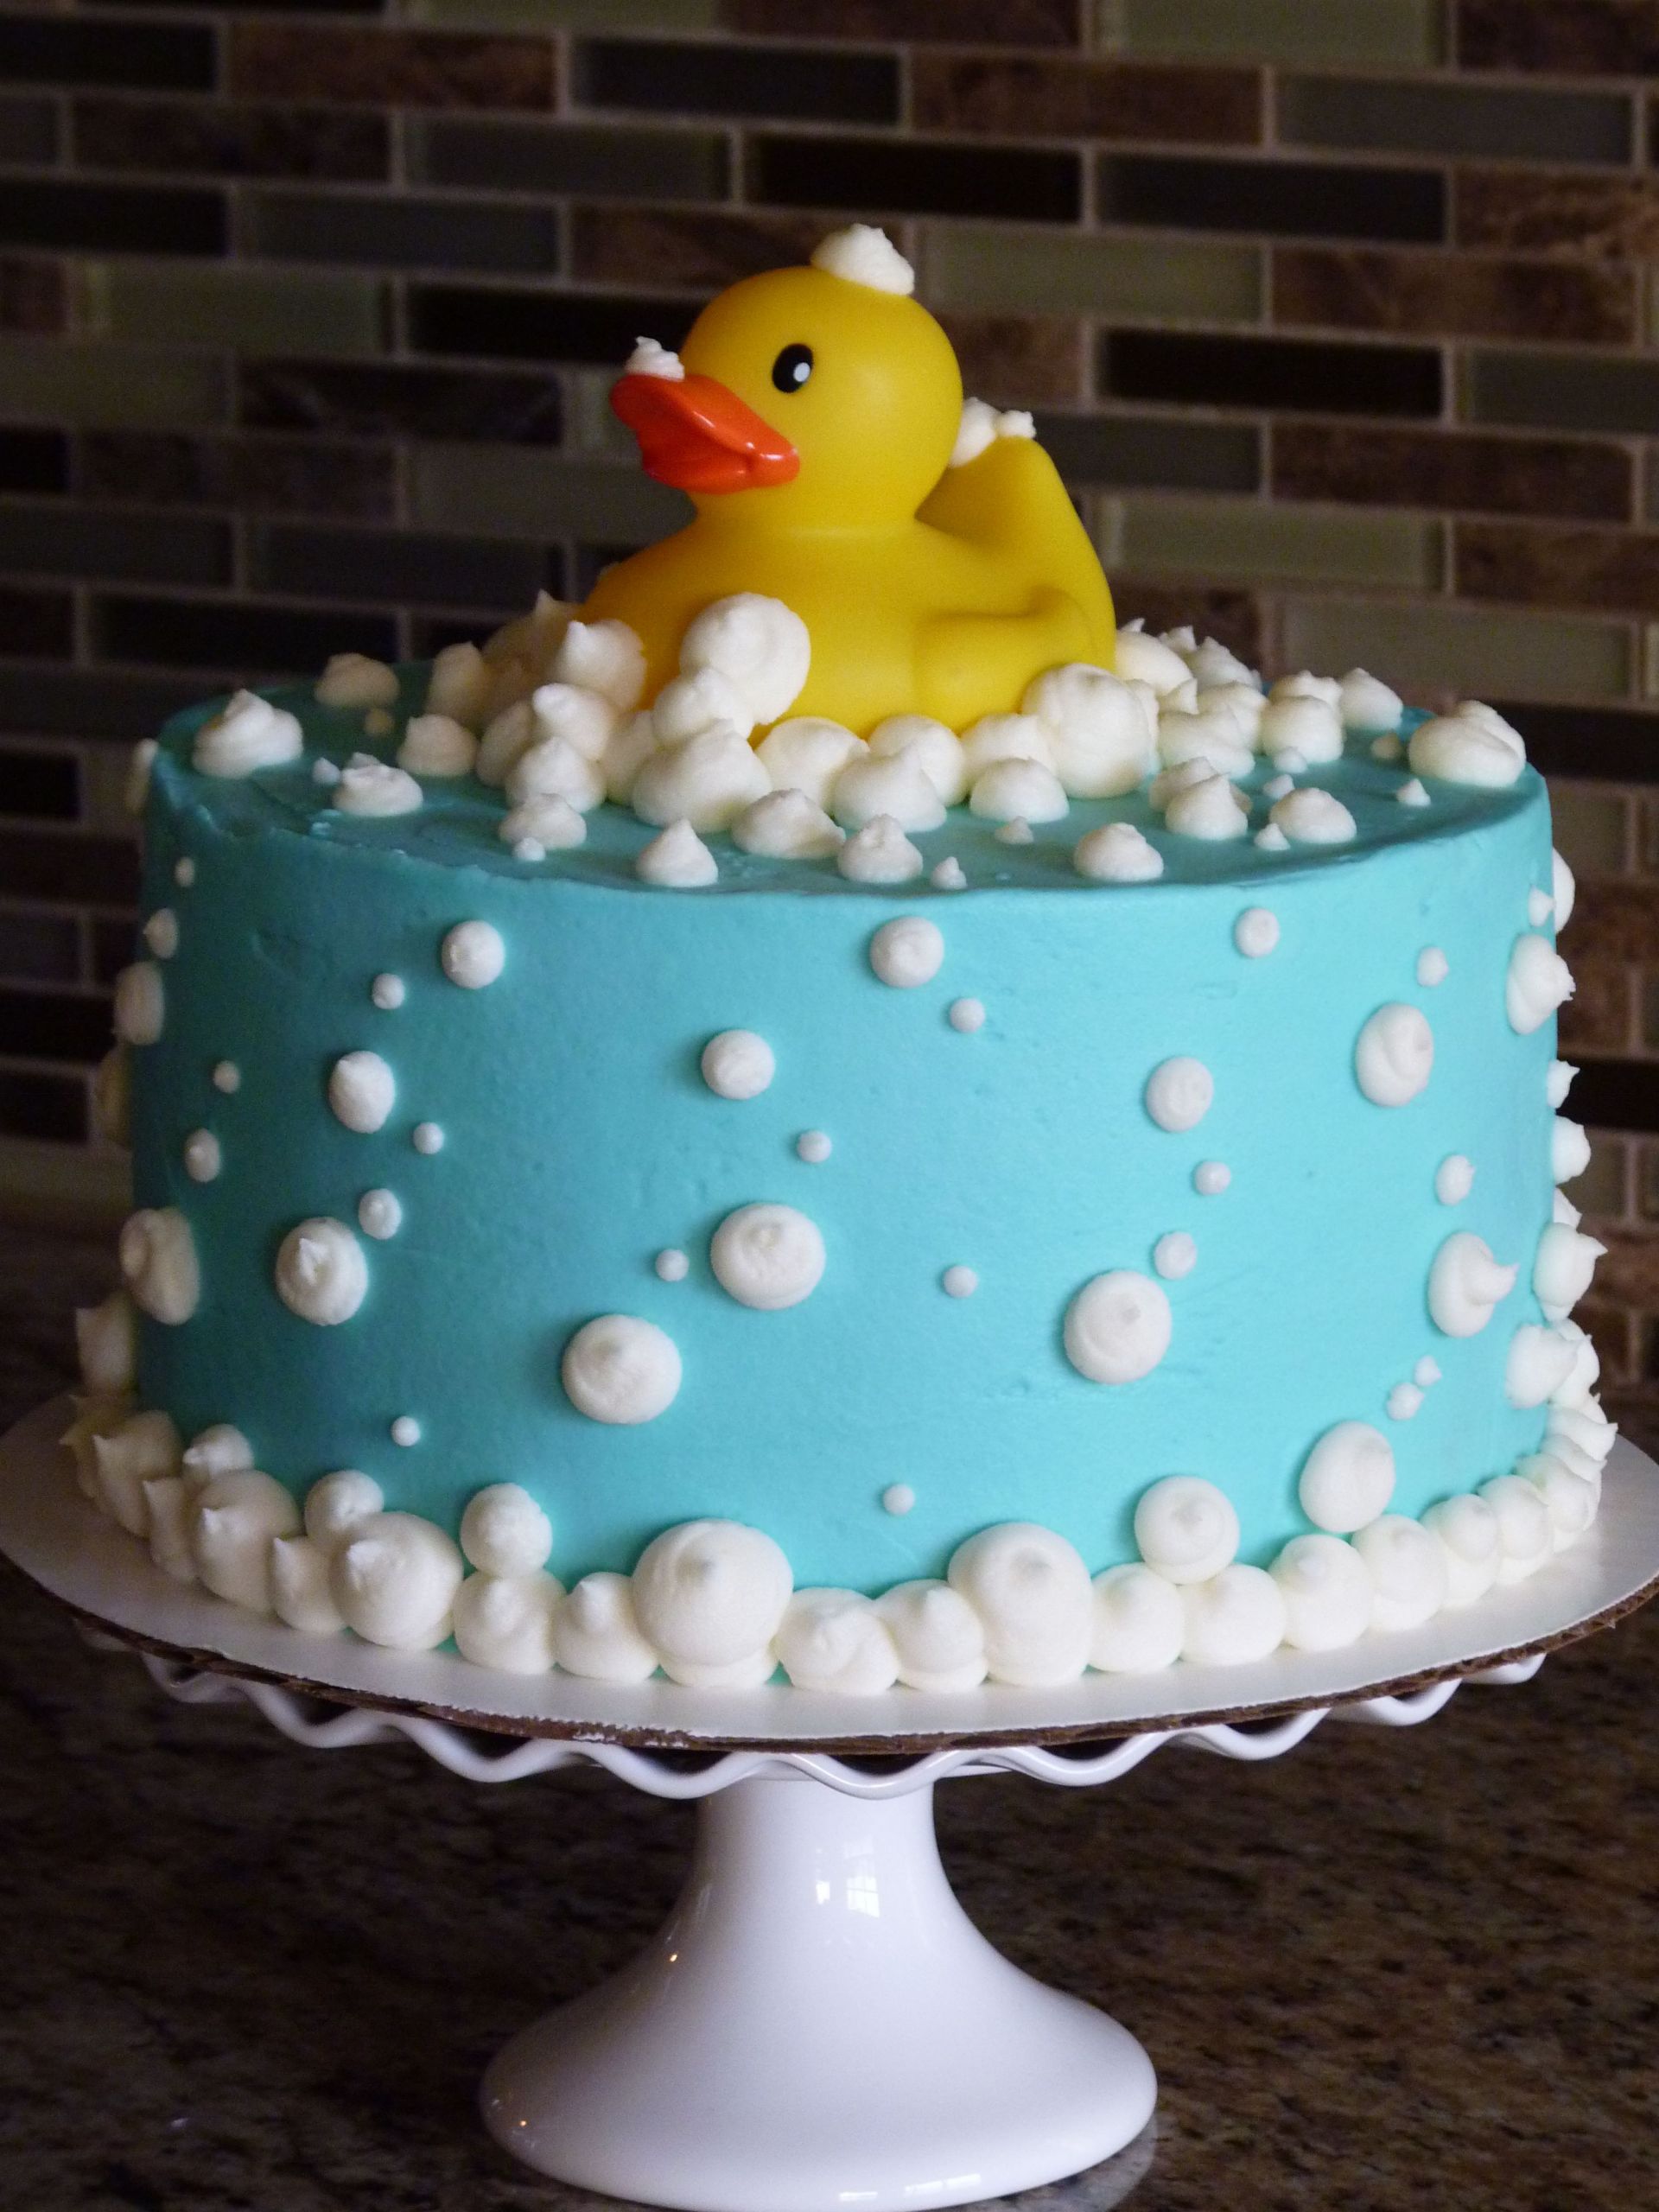 The 23 Best Ideas for Rubber Duckie Birthday Cake – Home, Family, Style ...